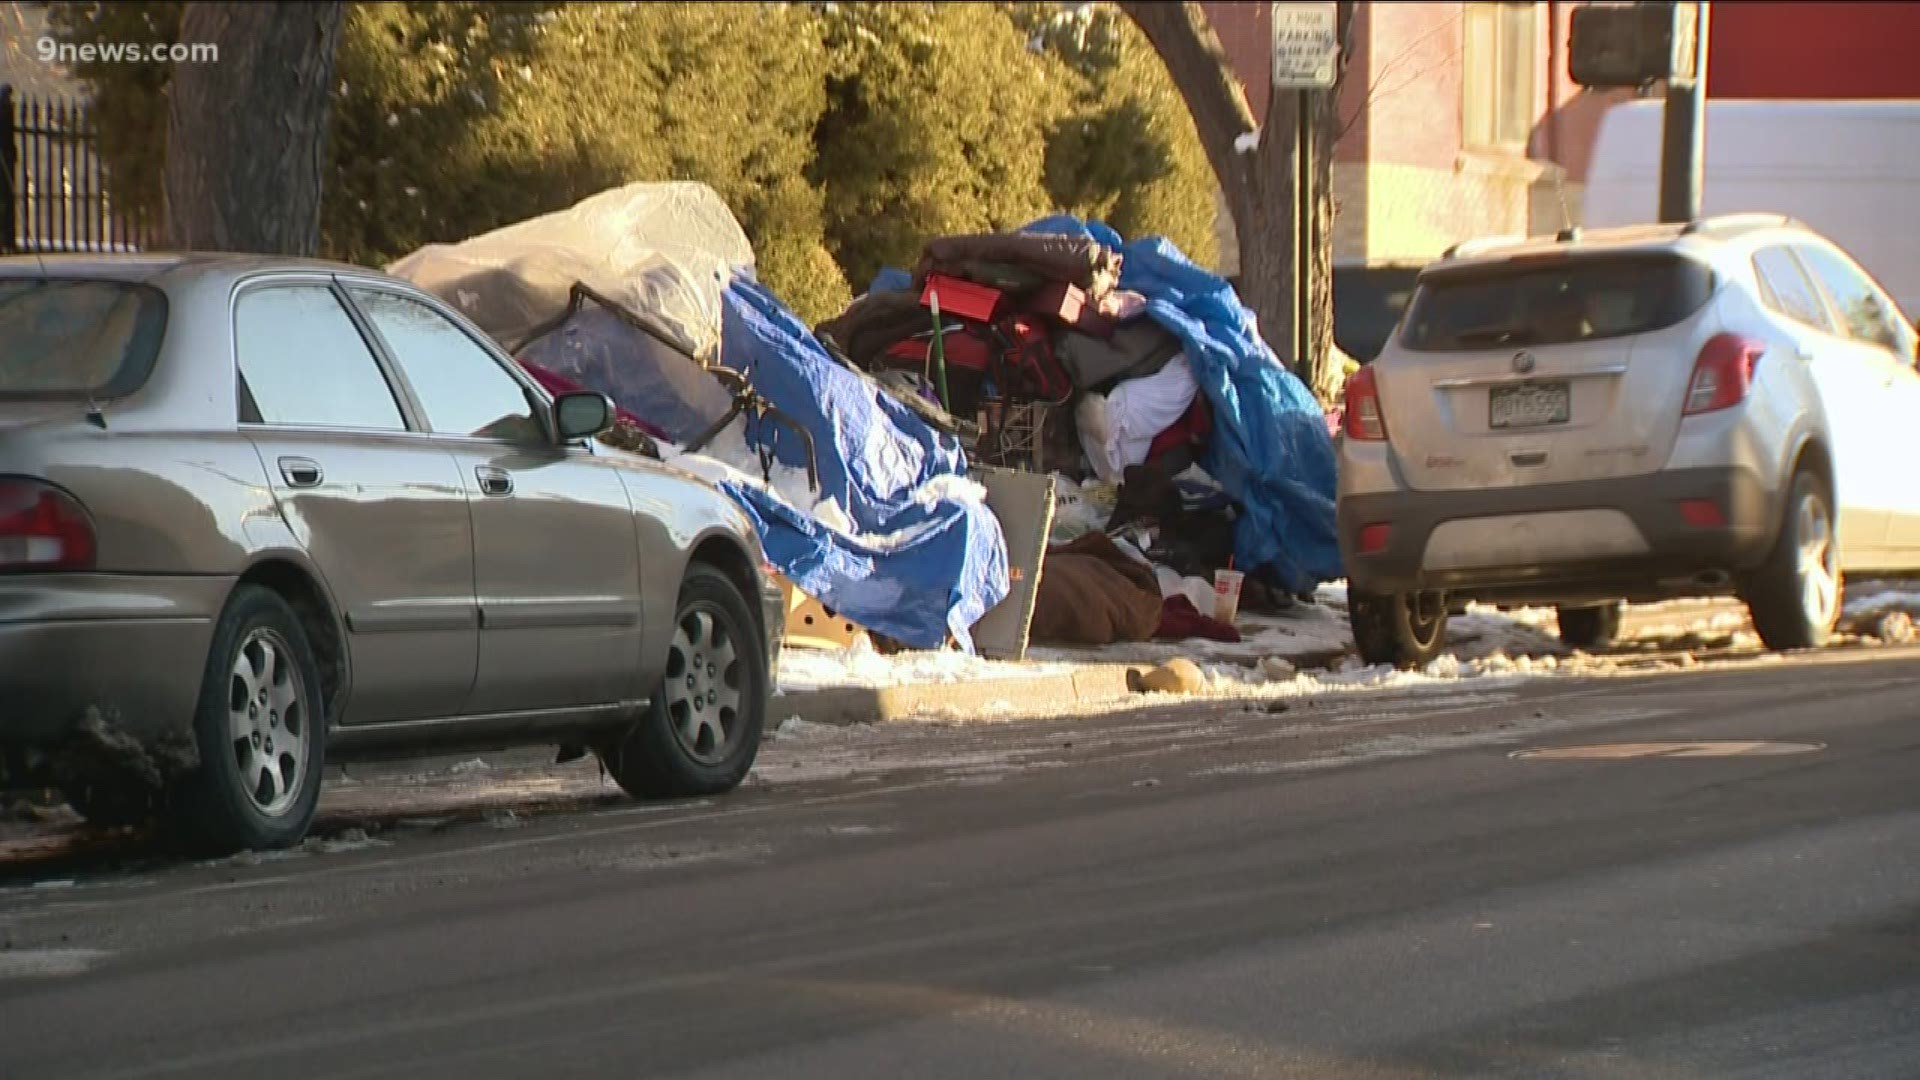 The Denver Police Department is not currently enforcing the city’s urban camping ban because of a court ruling last week that declared the law unconstitutional.